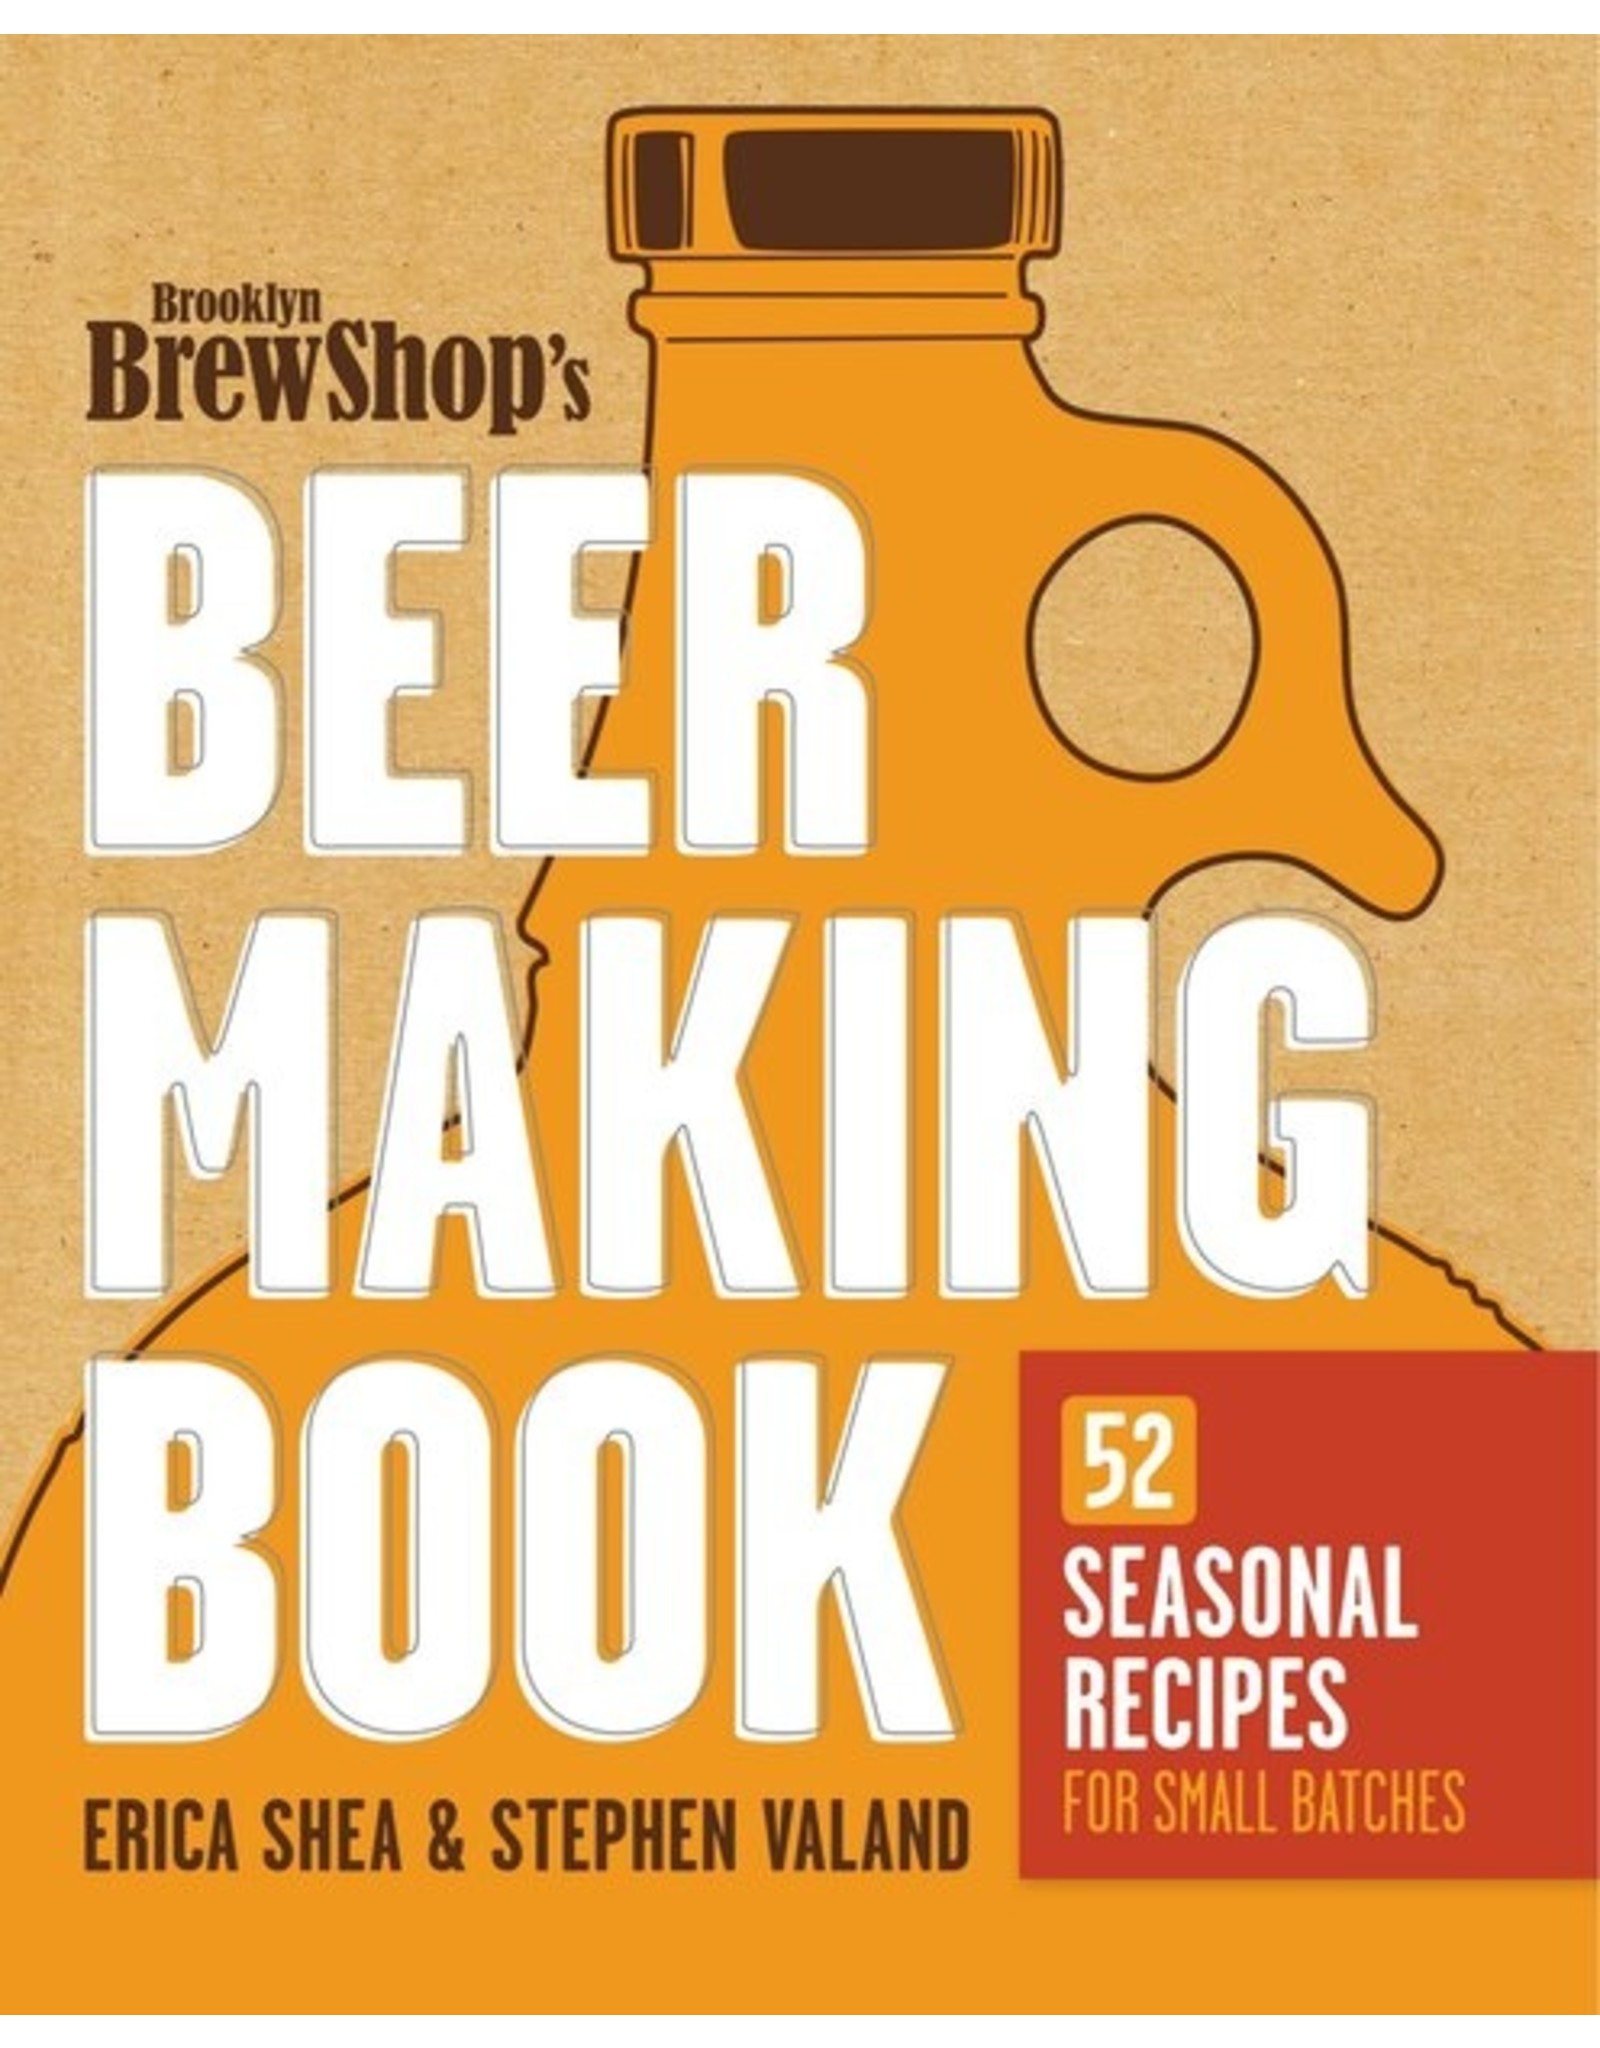 Literature Brooklyn Brew Shop's Beer Making Book: 52 Seasonal Recipes for Small Batches